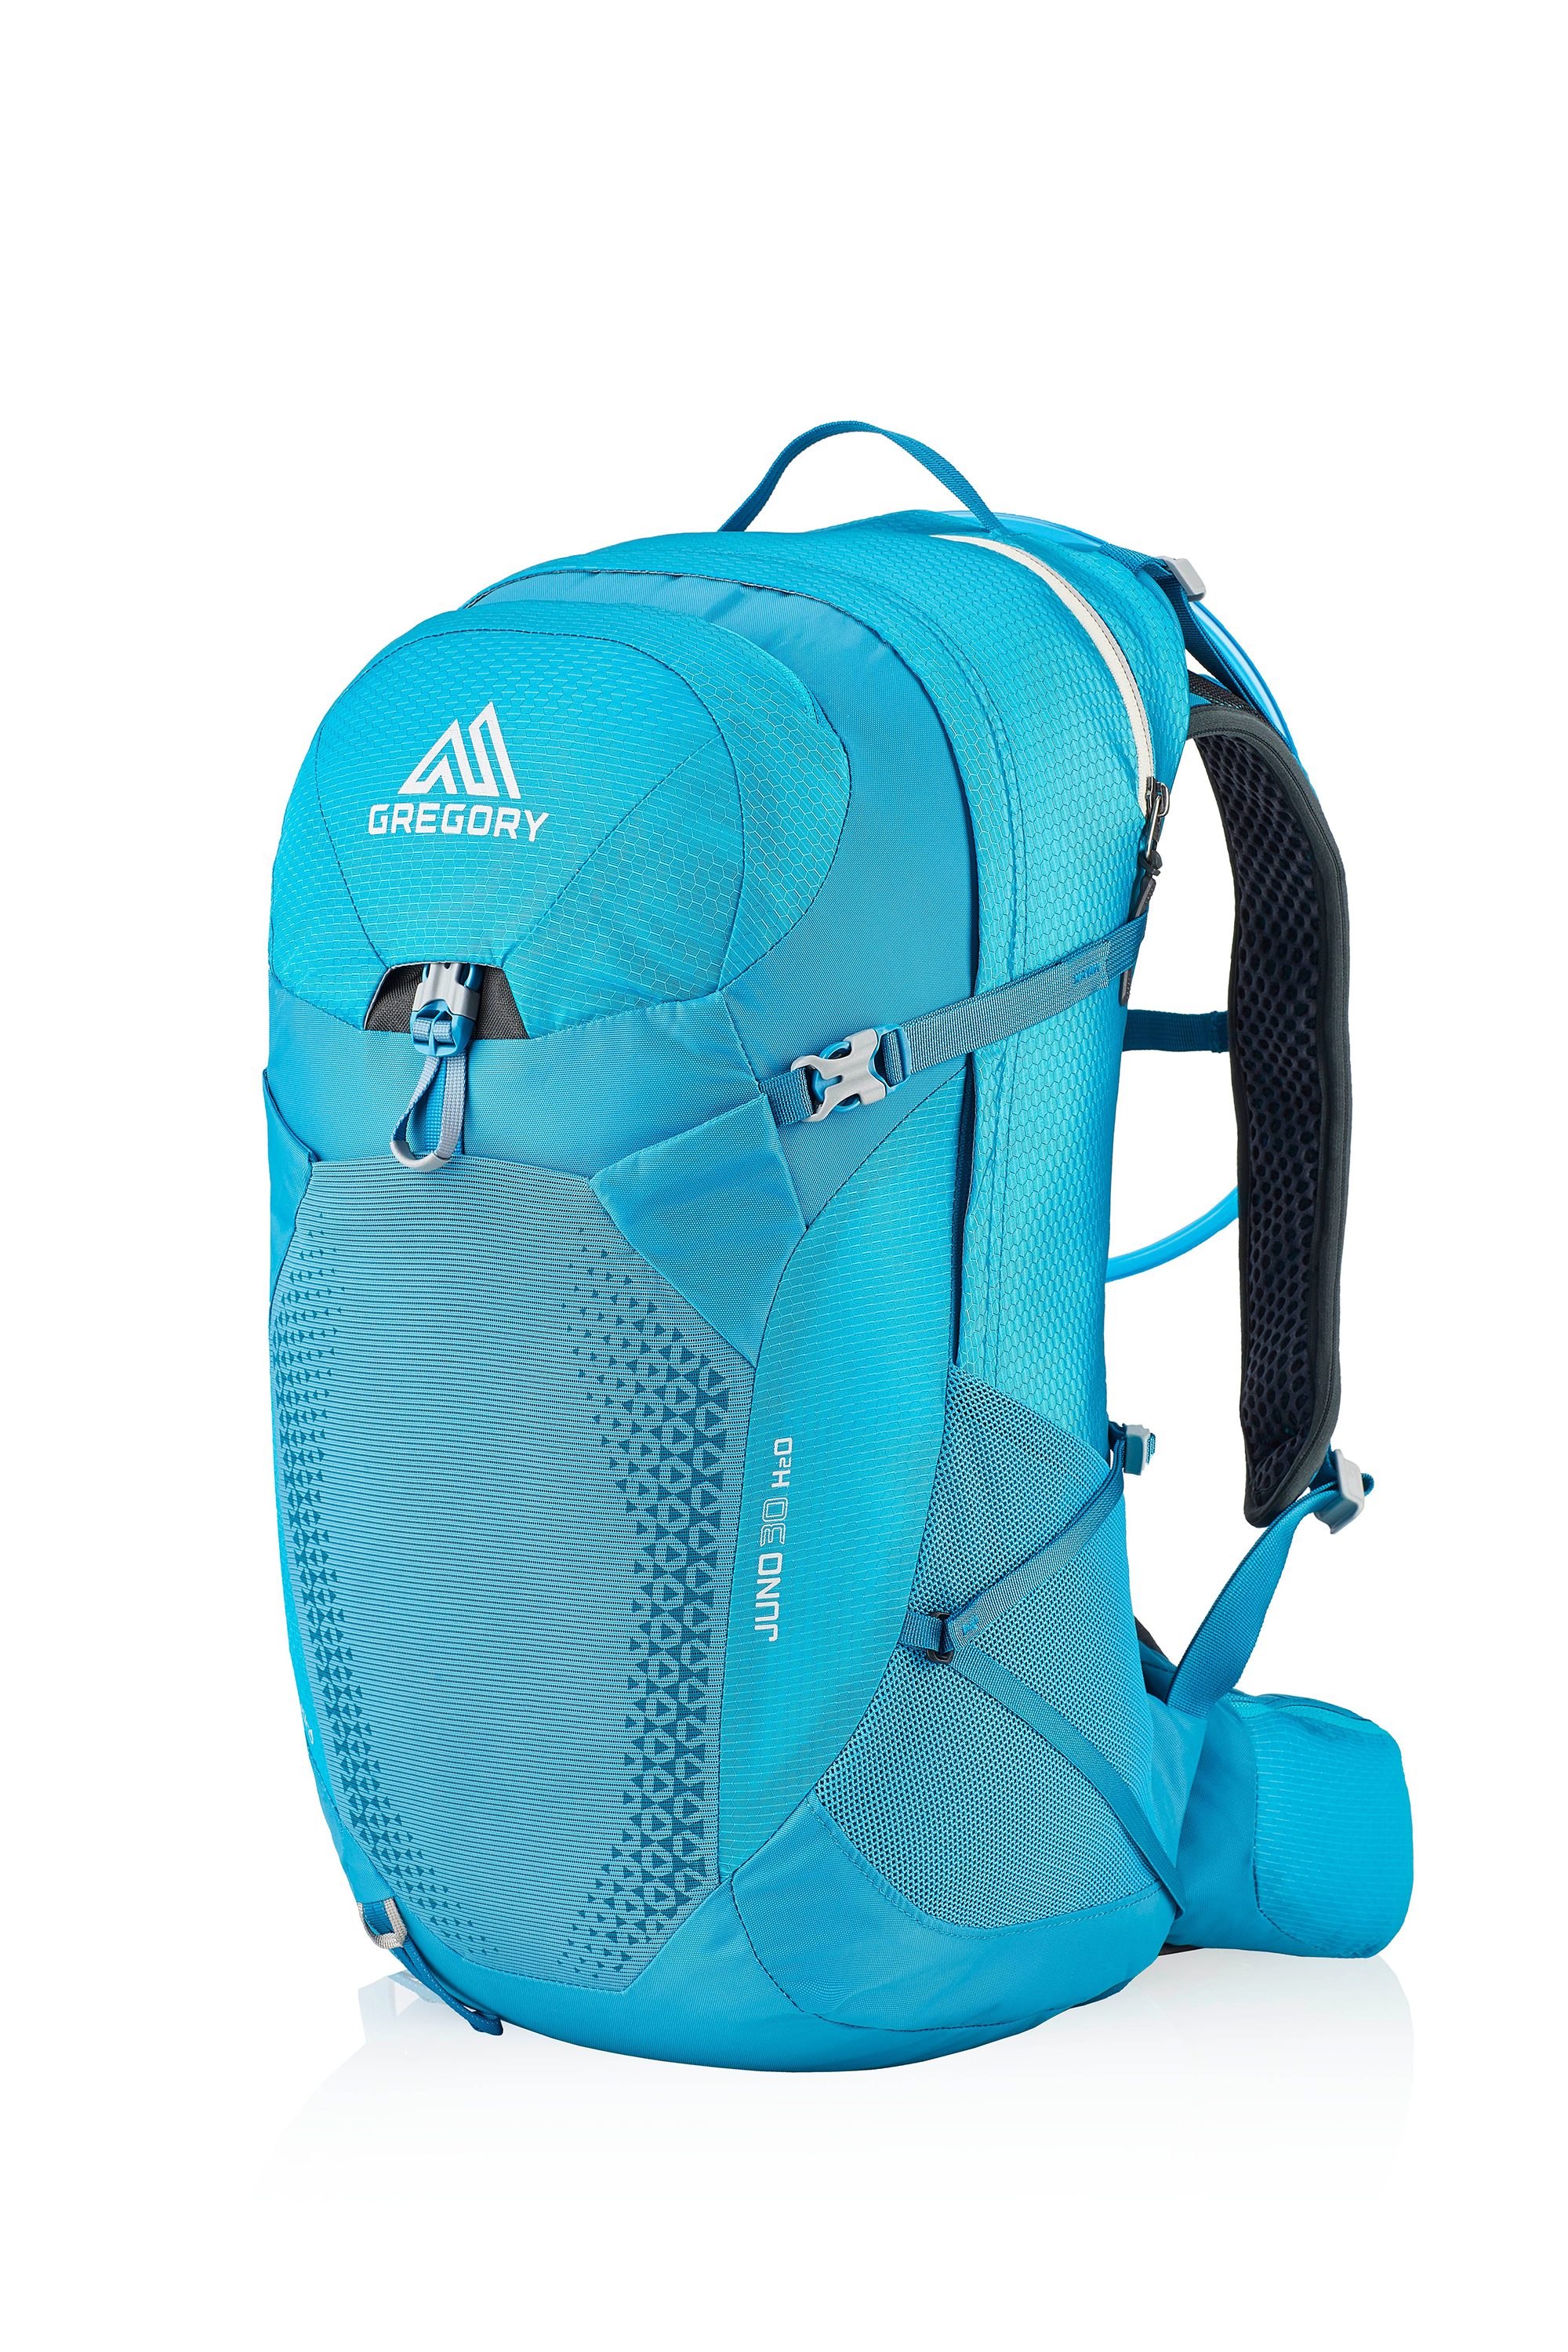 Gregory Juno 30 H2O Plus Size Hydration Pack for Ladies